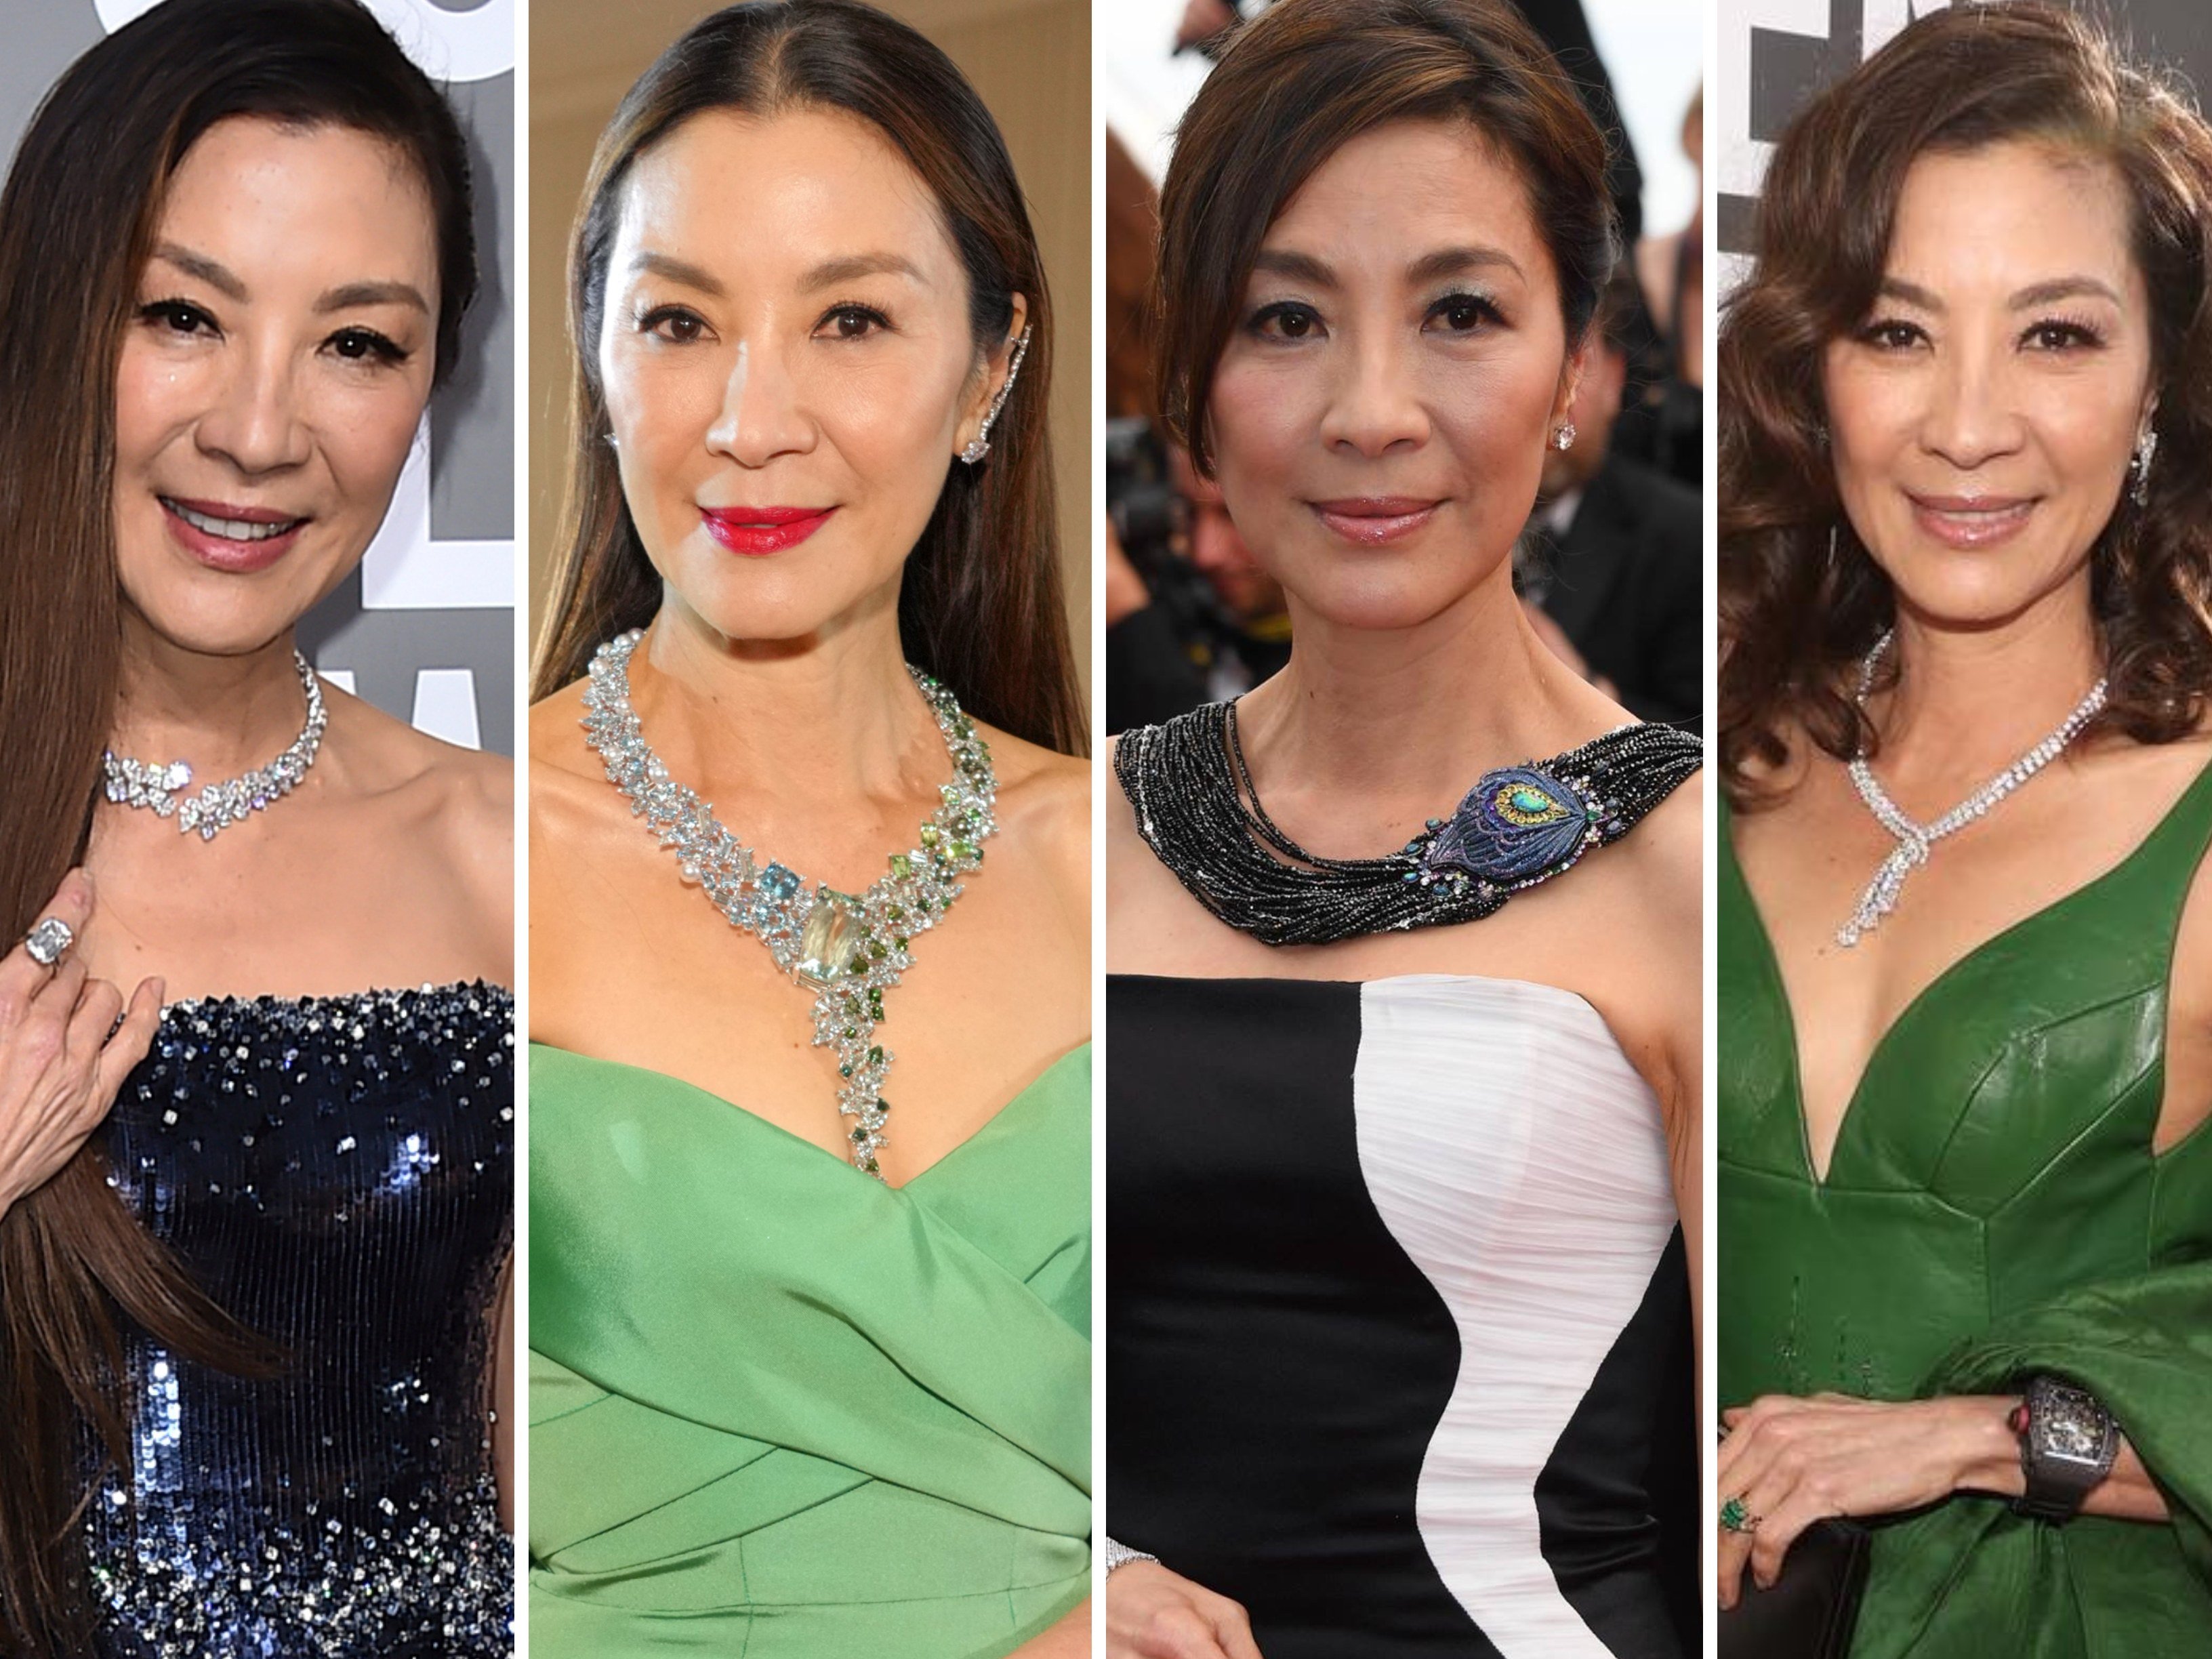 Michelle Yeoh has donned some truly dazzling jewellery over the years. Photos: Invision, Getty Images, @Chopard/Facebook, @michelleyeoh_official/Instagram